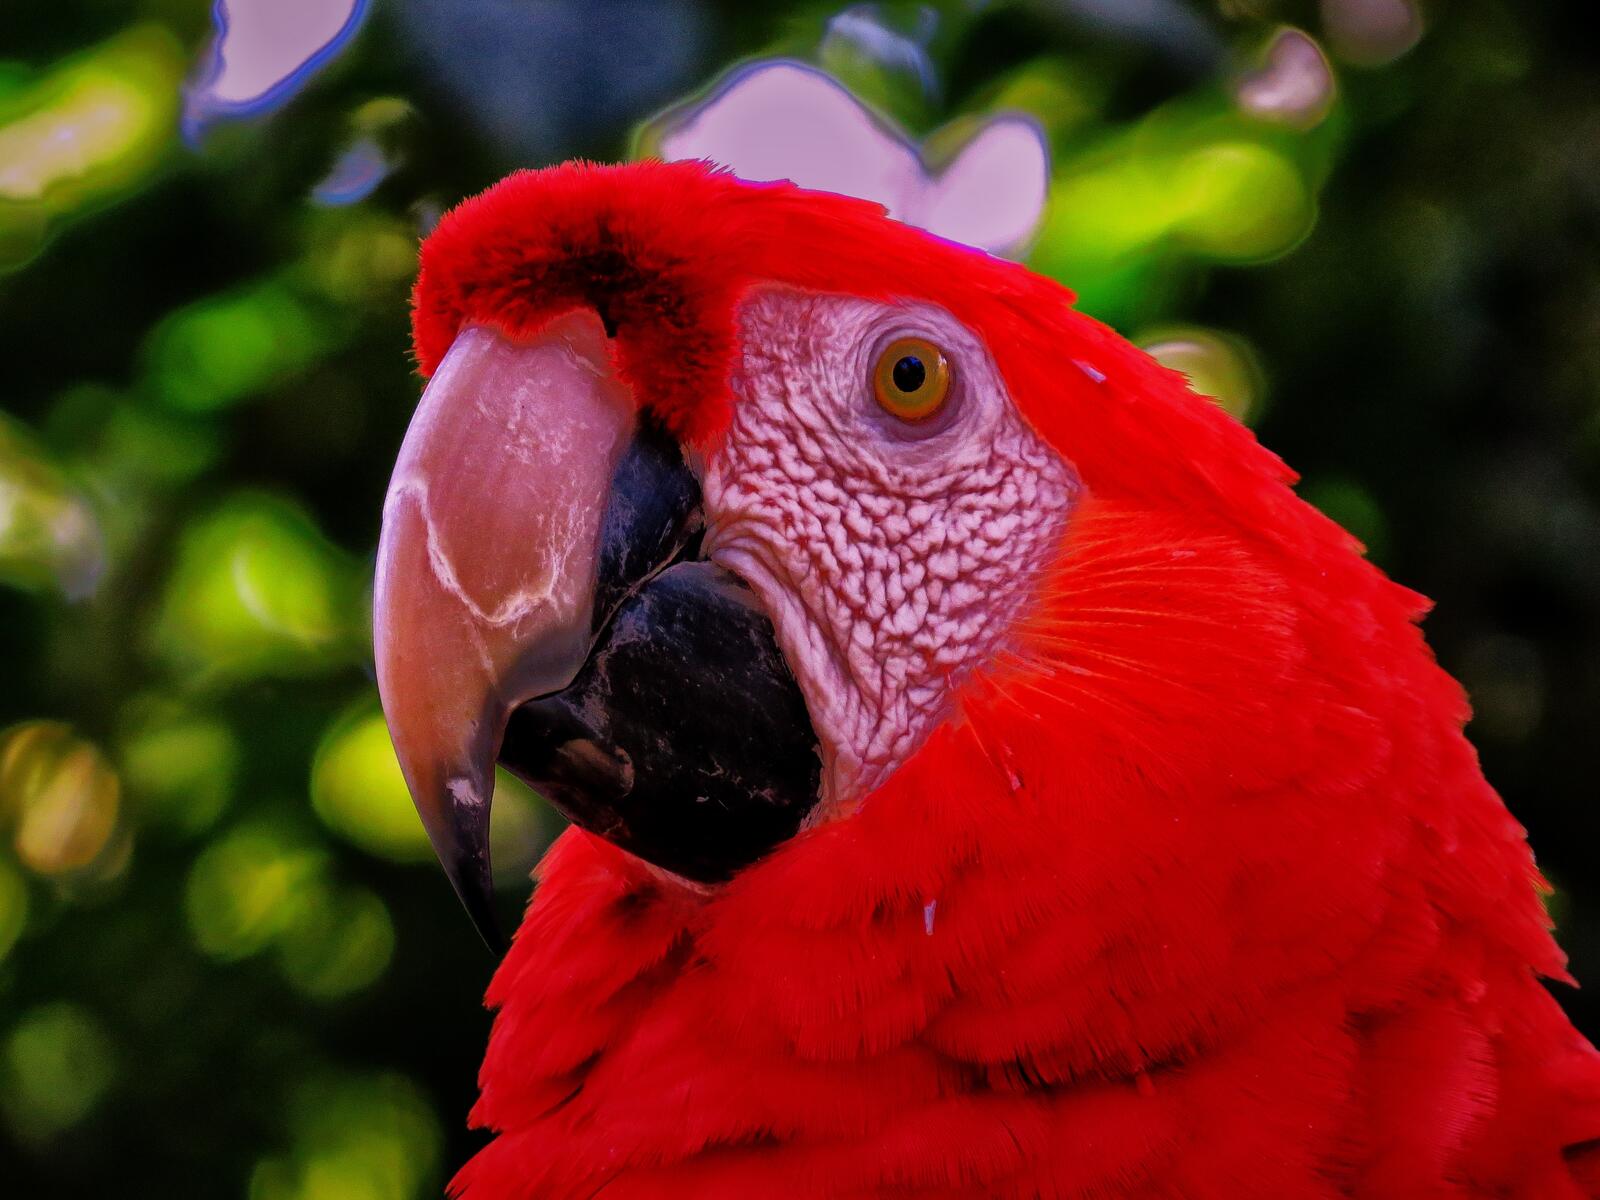 Wallpapers wallpaper parrot red close on the desktop